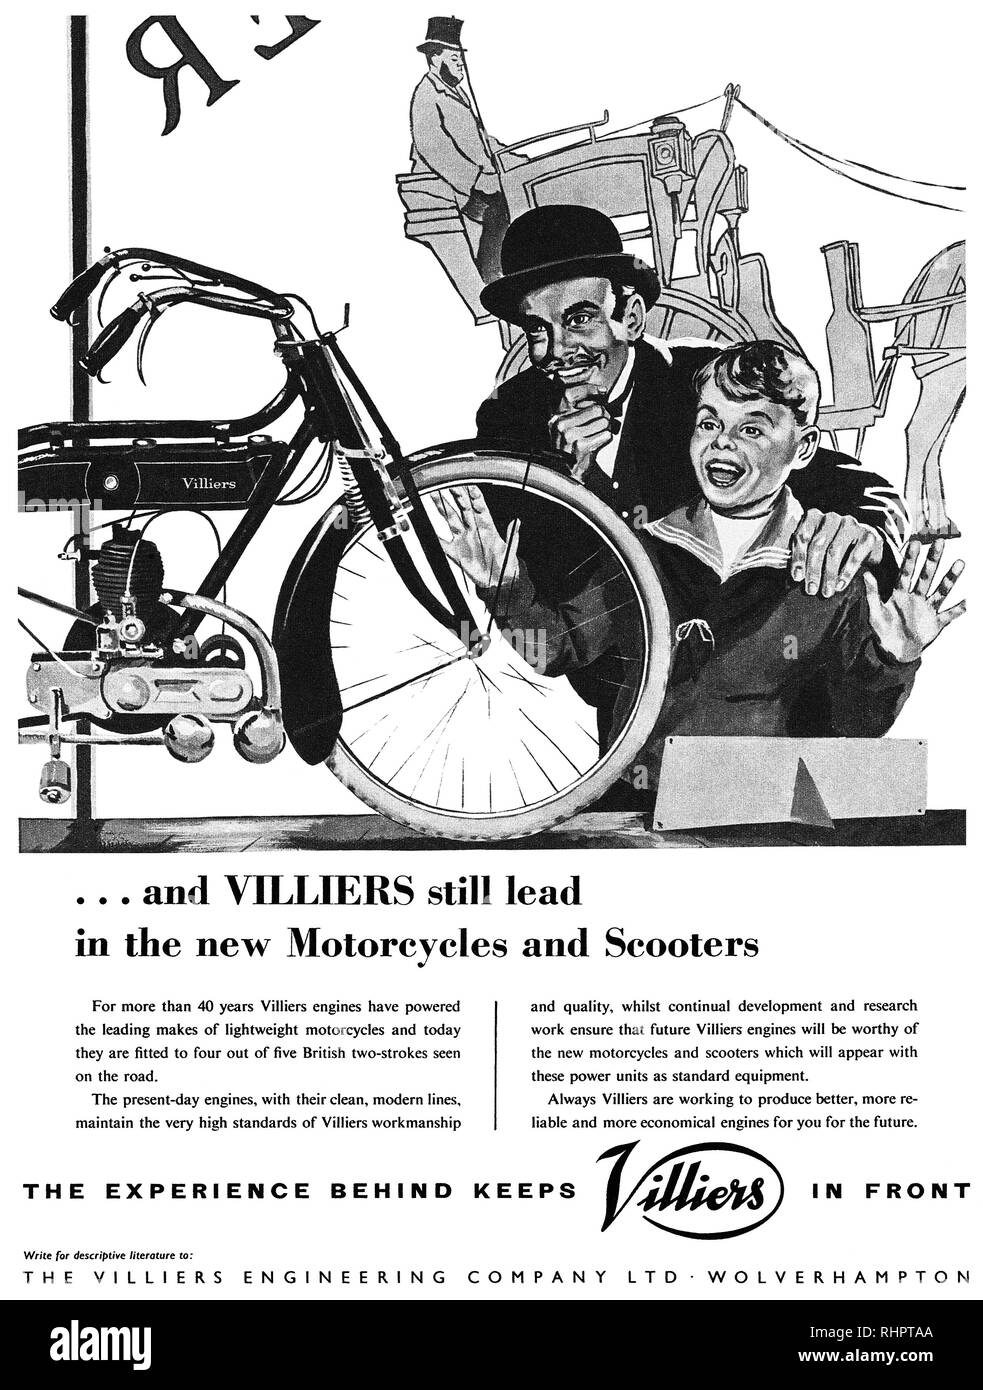 1956 British advertisement for Villiers motorcycles and scooters. Stock Photo